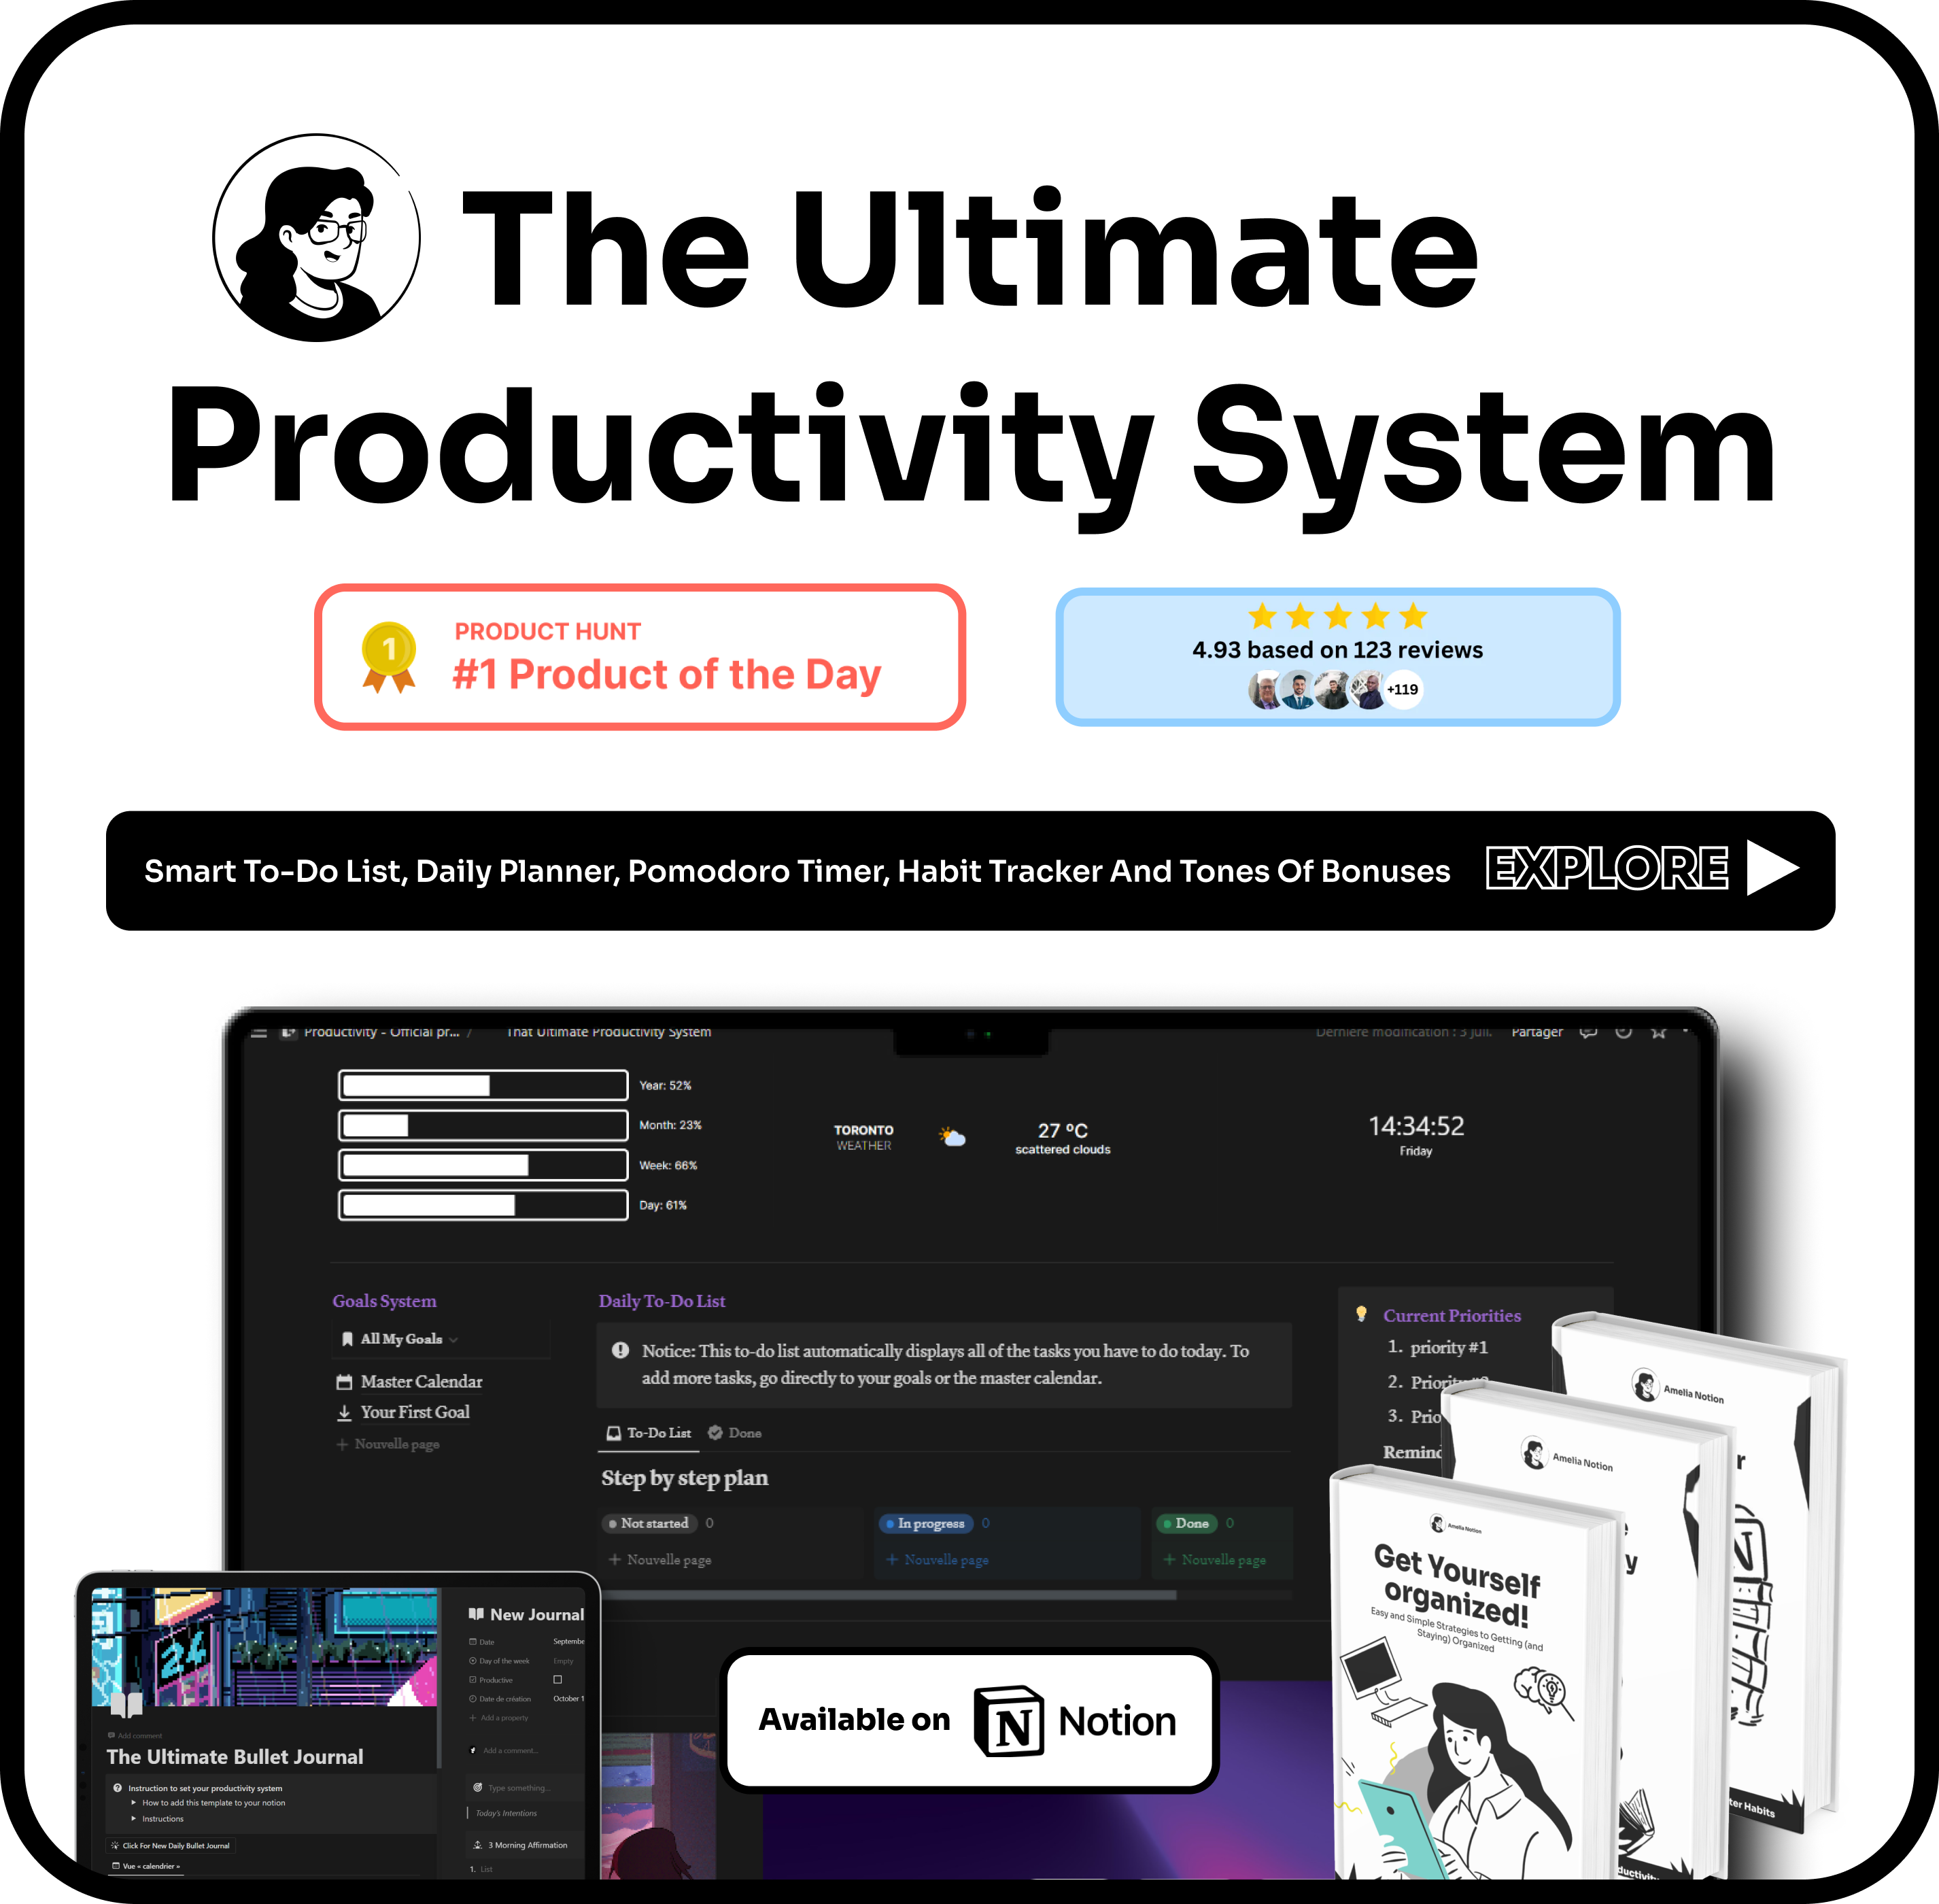 The Ultimate Productivity System